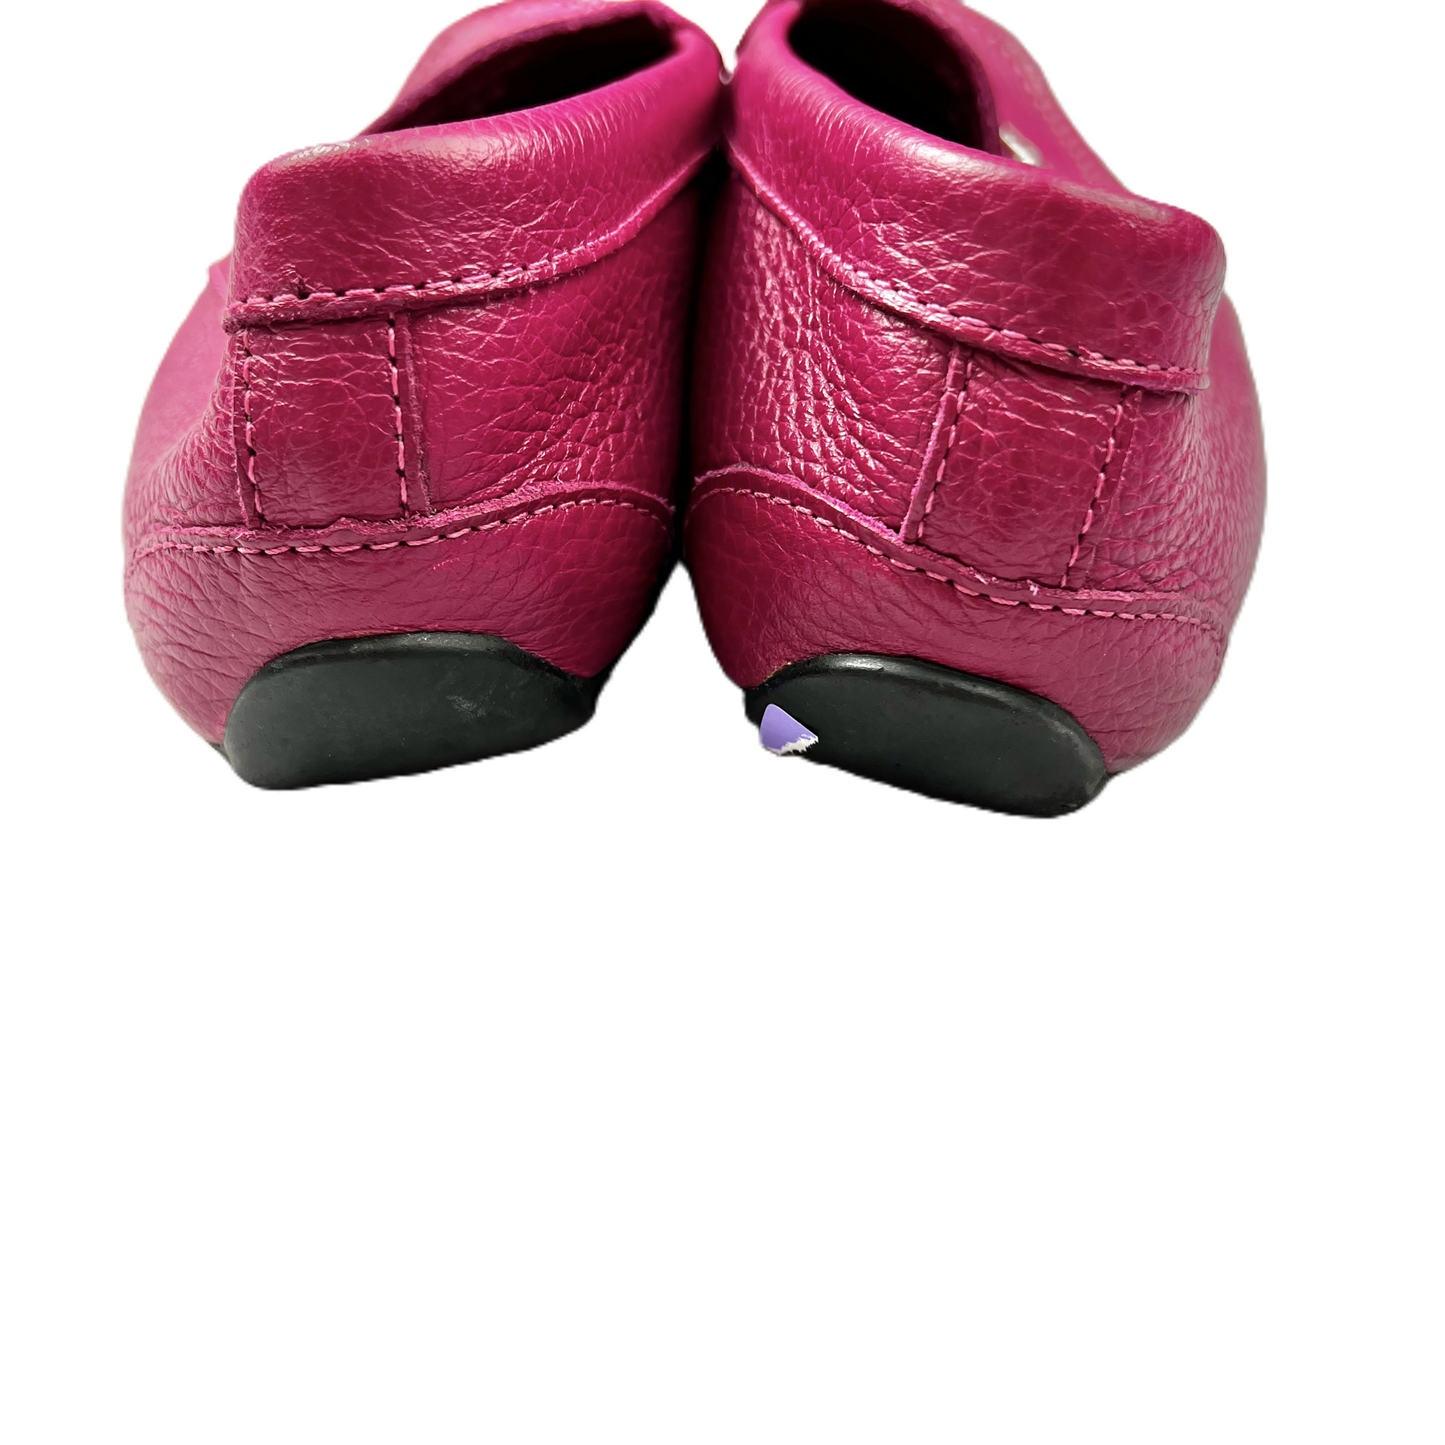 Purple Shoes Flats By Saks Fifth Avenue, Size: 9